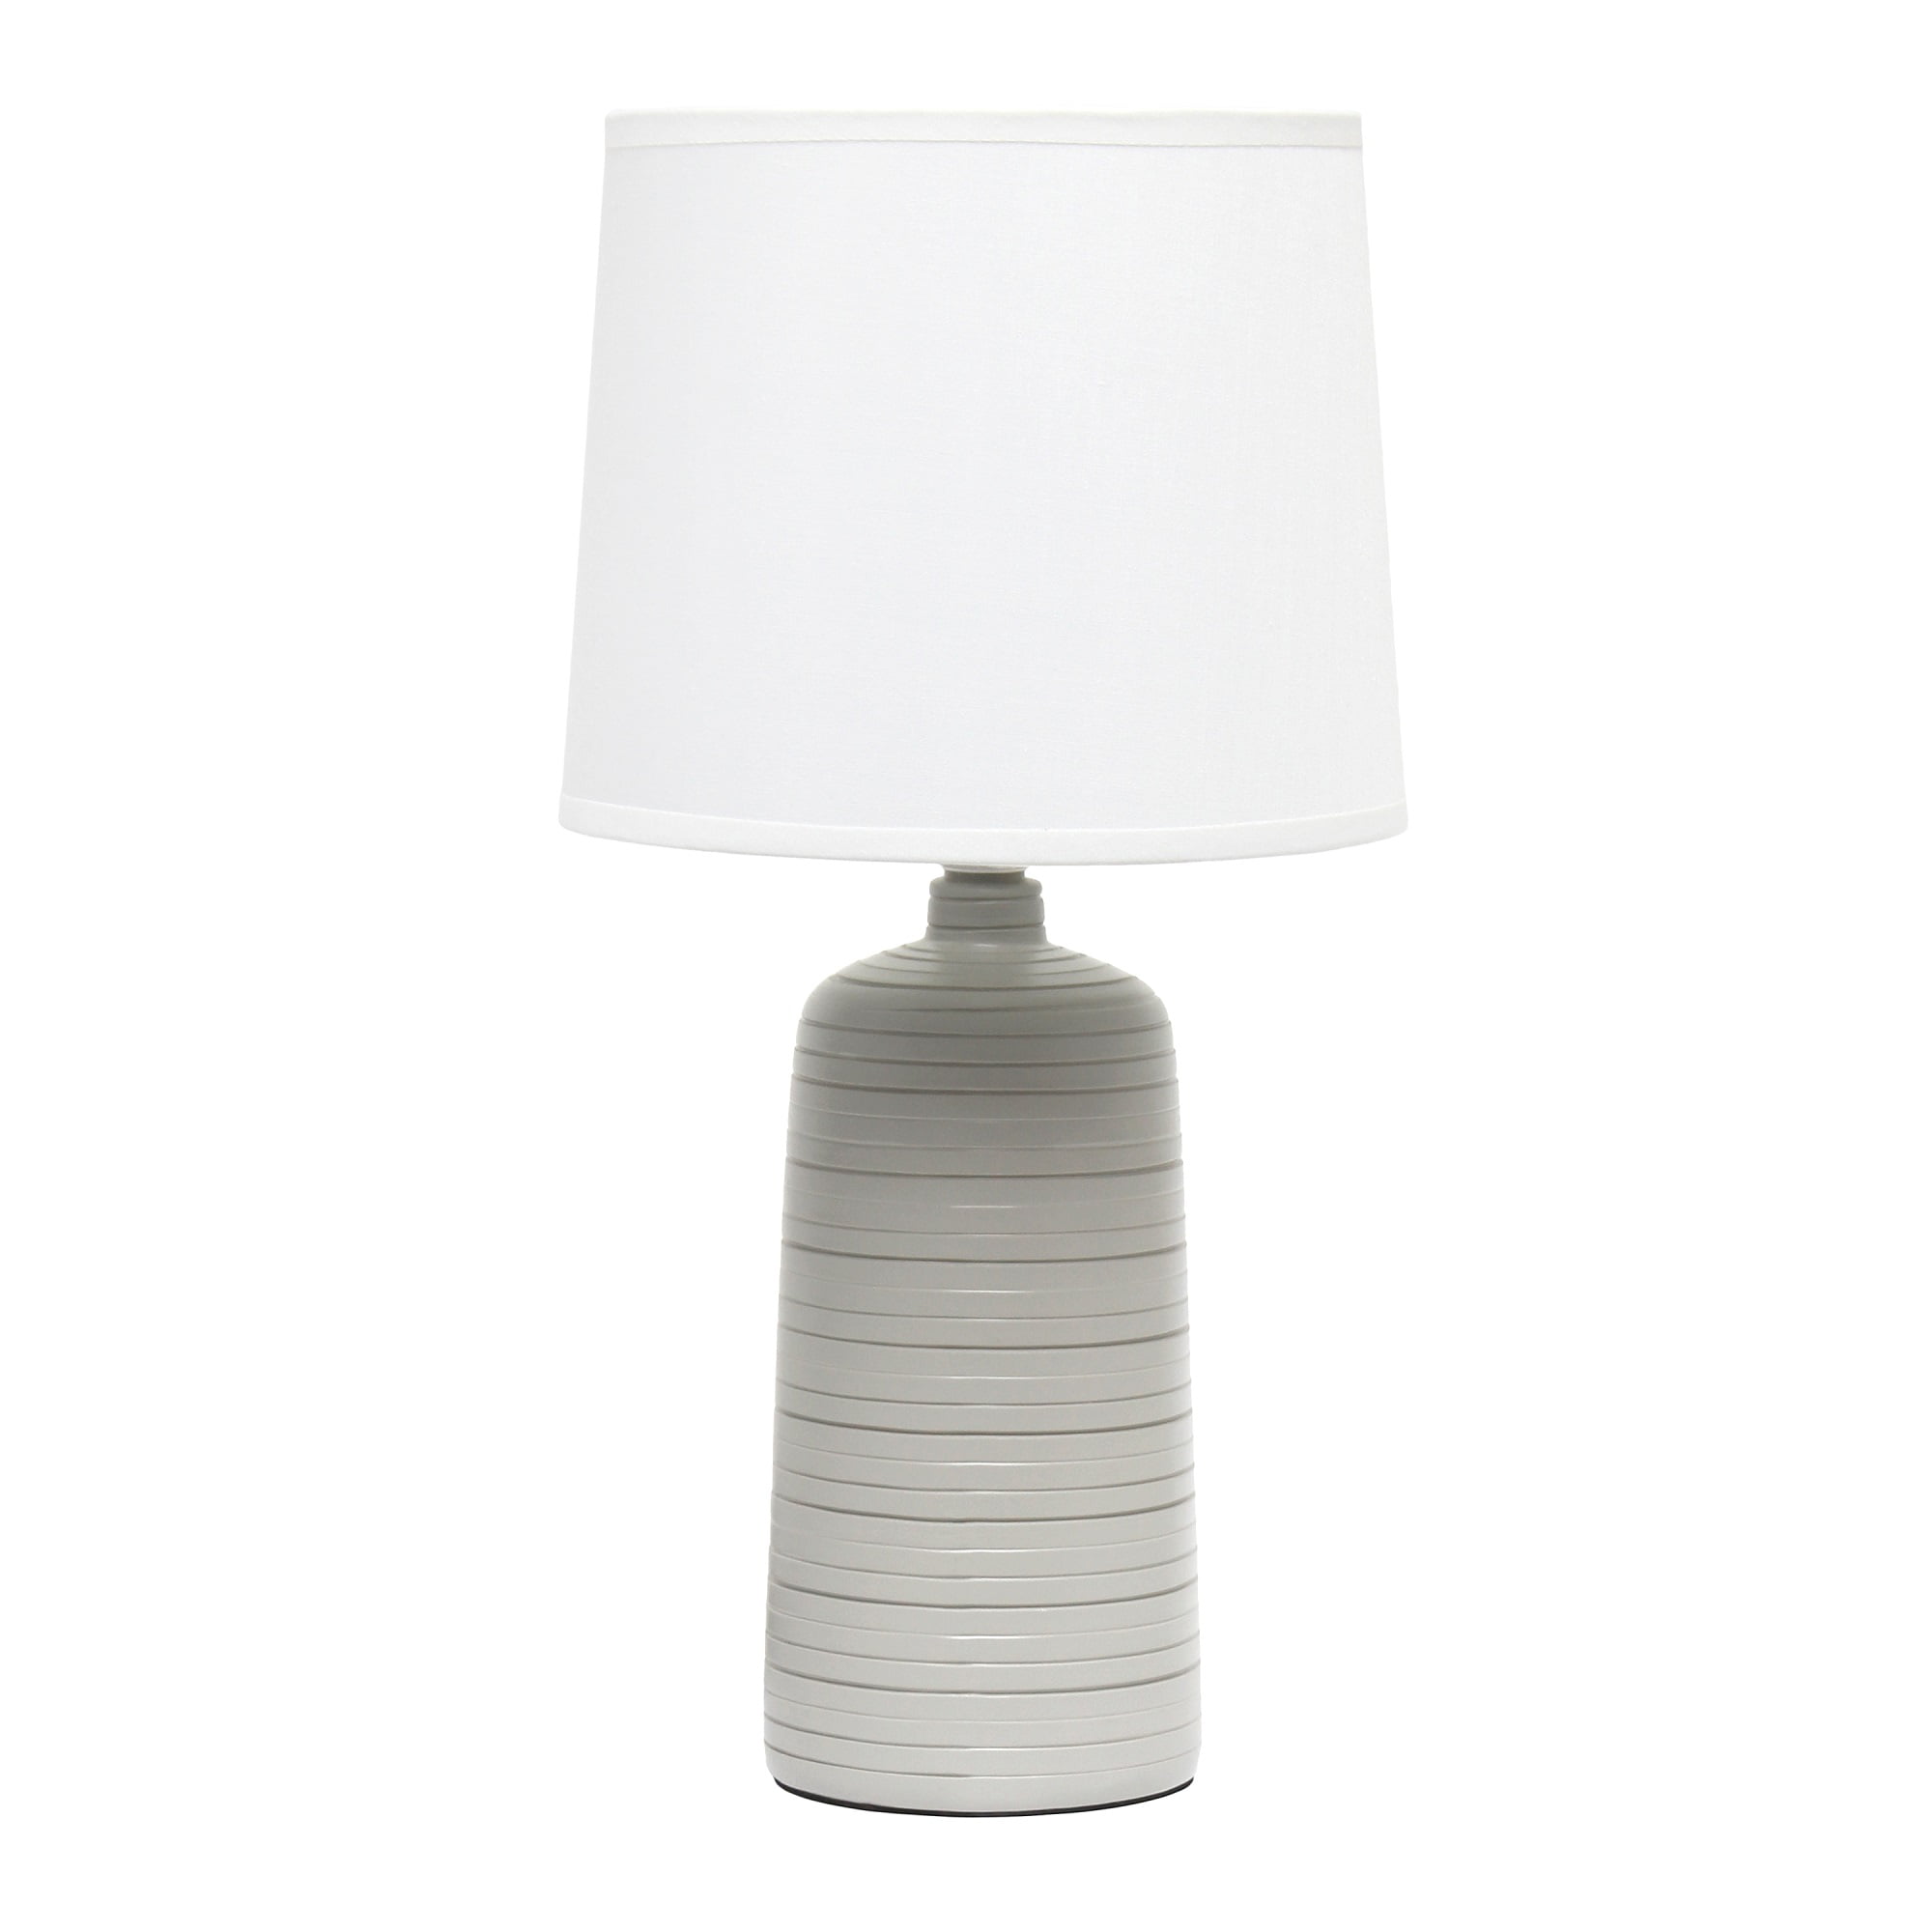 Simple Designs Textured Linear Ceramic Table Lamp, Taupe